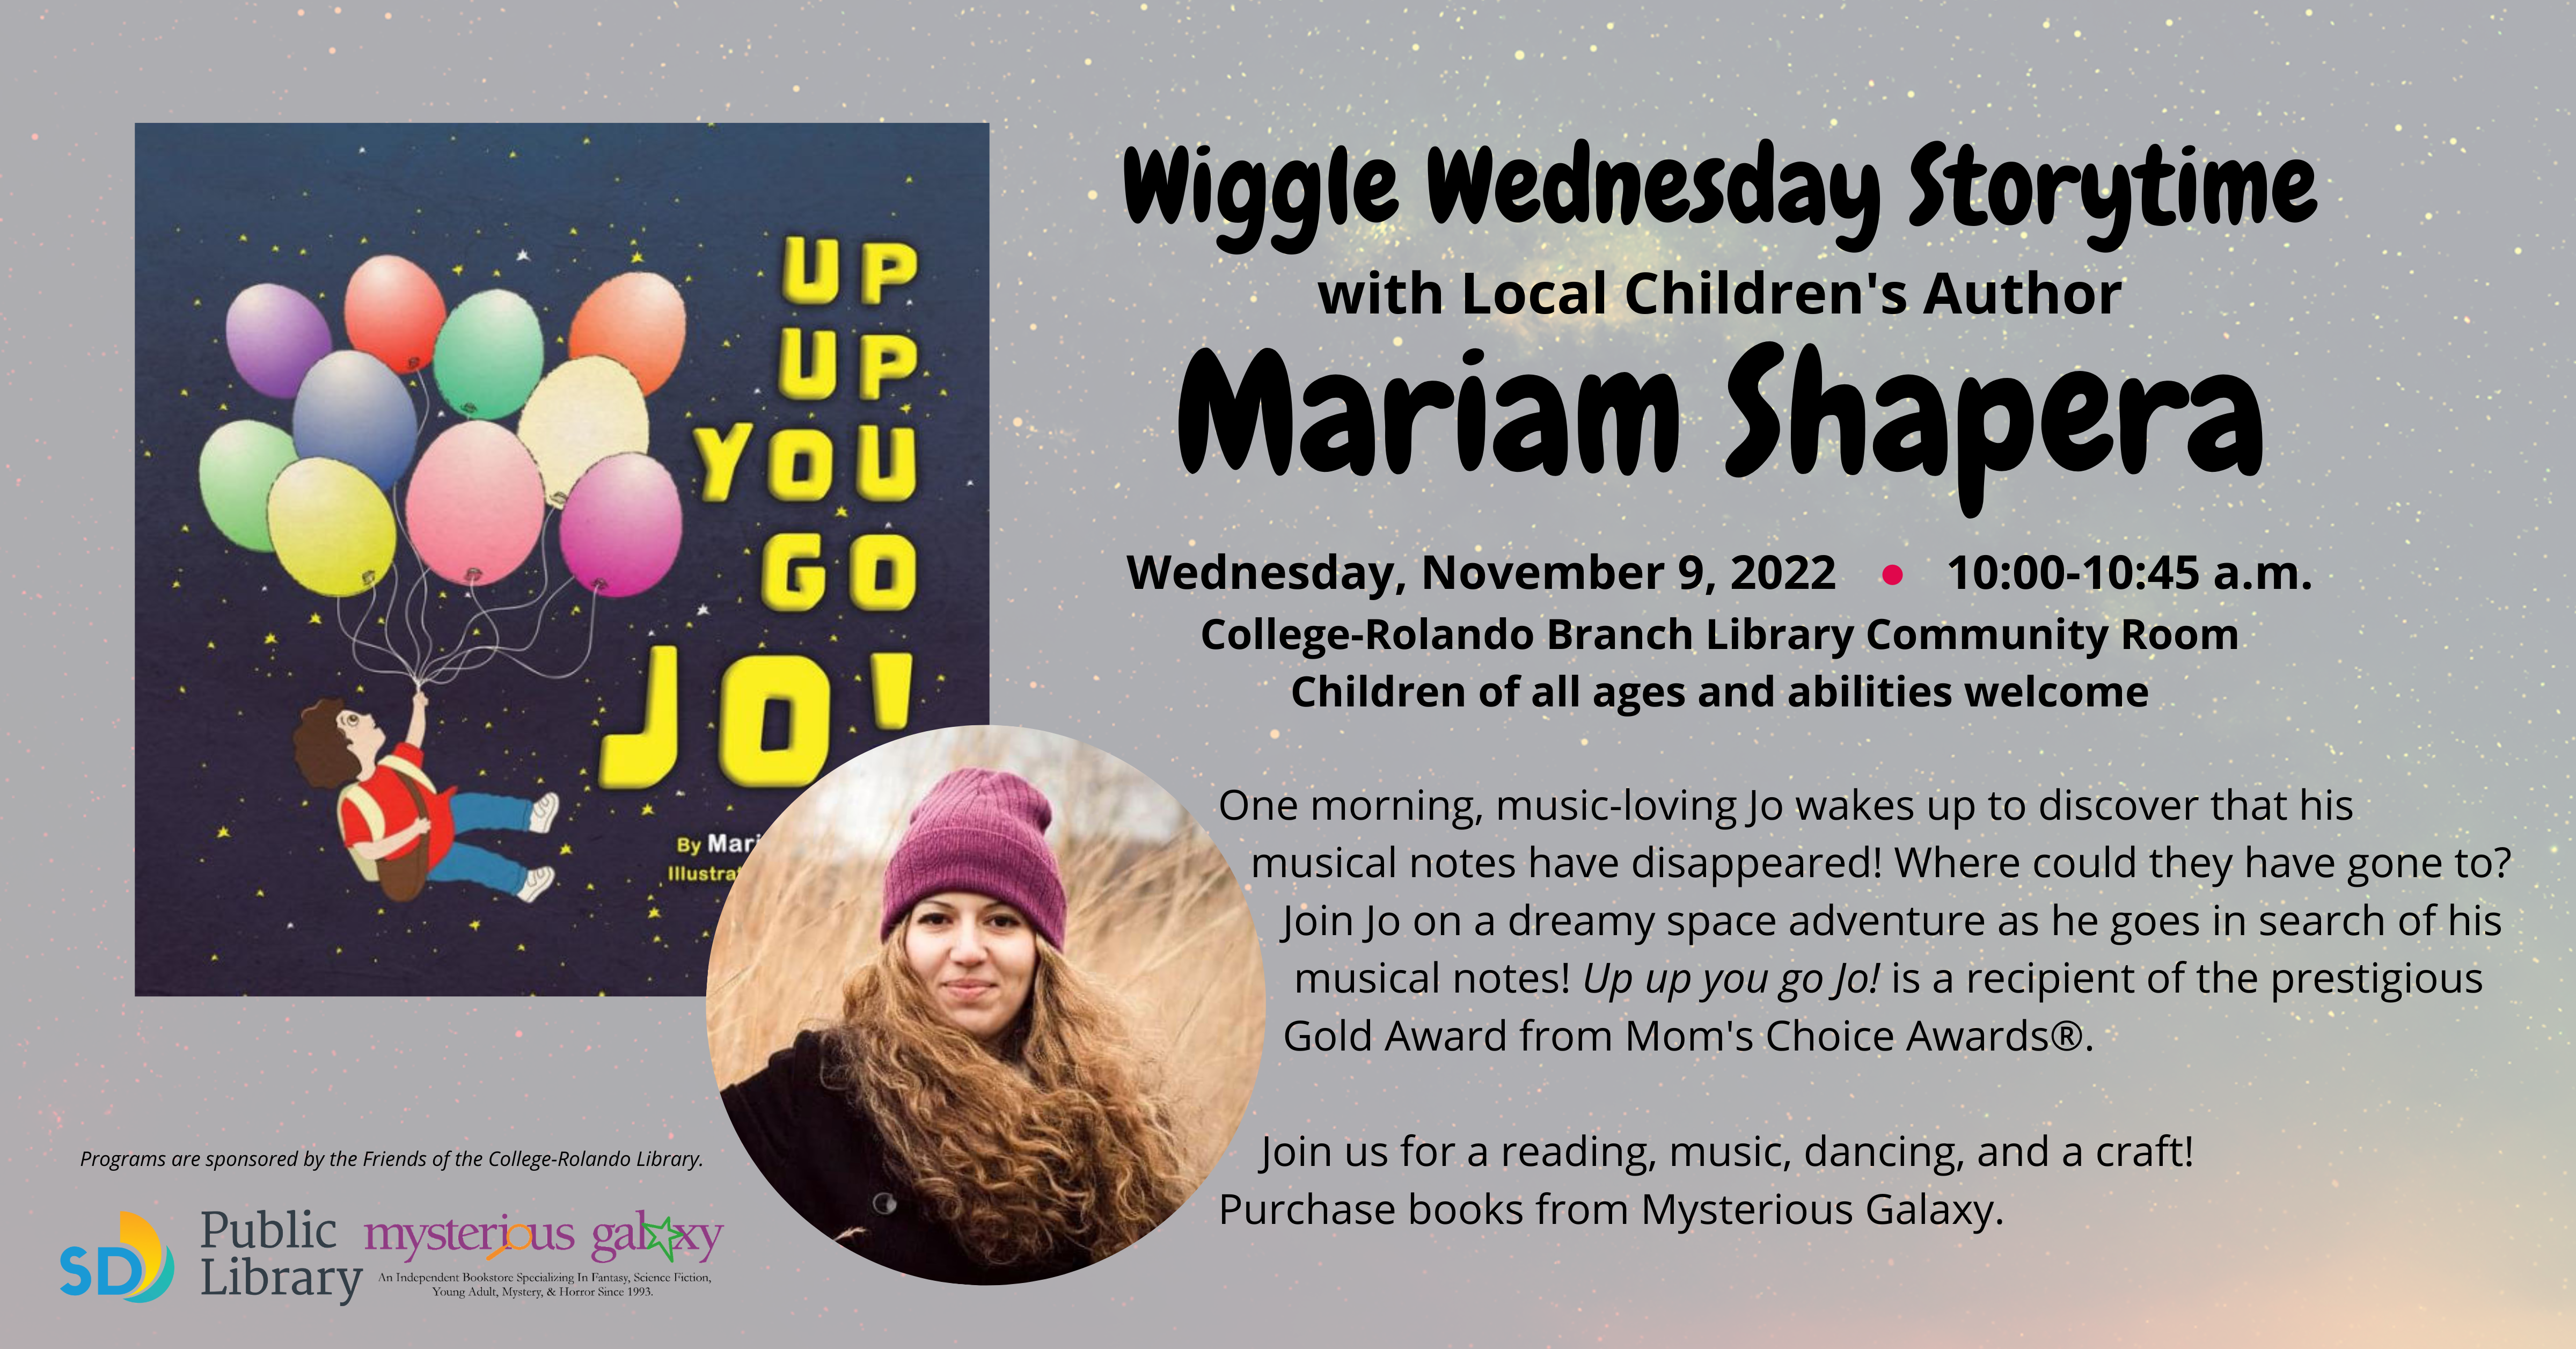 Wiggle Wednesday Storytime with Local Children's Author Mariam Shapera. Wednesday, November 9, 2022         10:00-10:45 a.m. College-Rolando Branch Library Community Room Children of all ages and abilities welcome.  